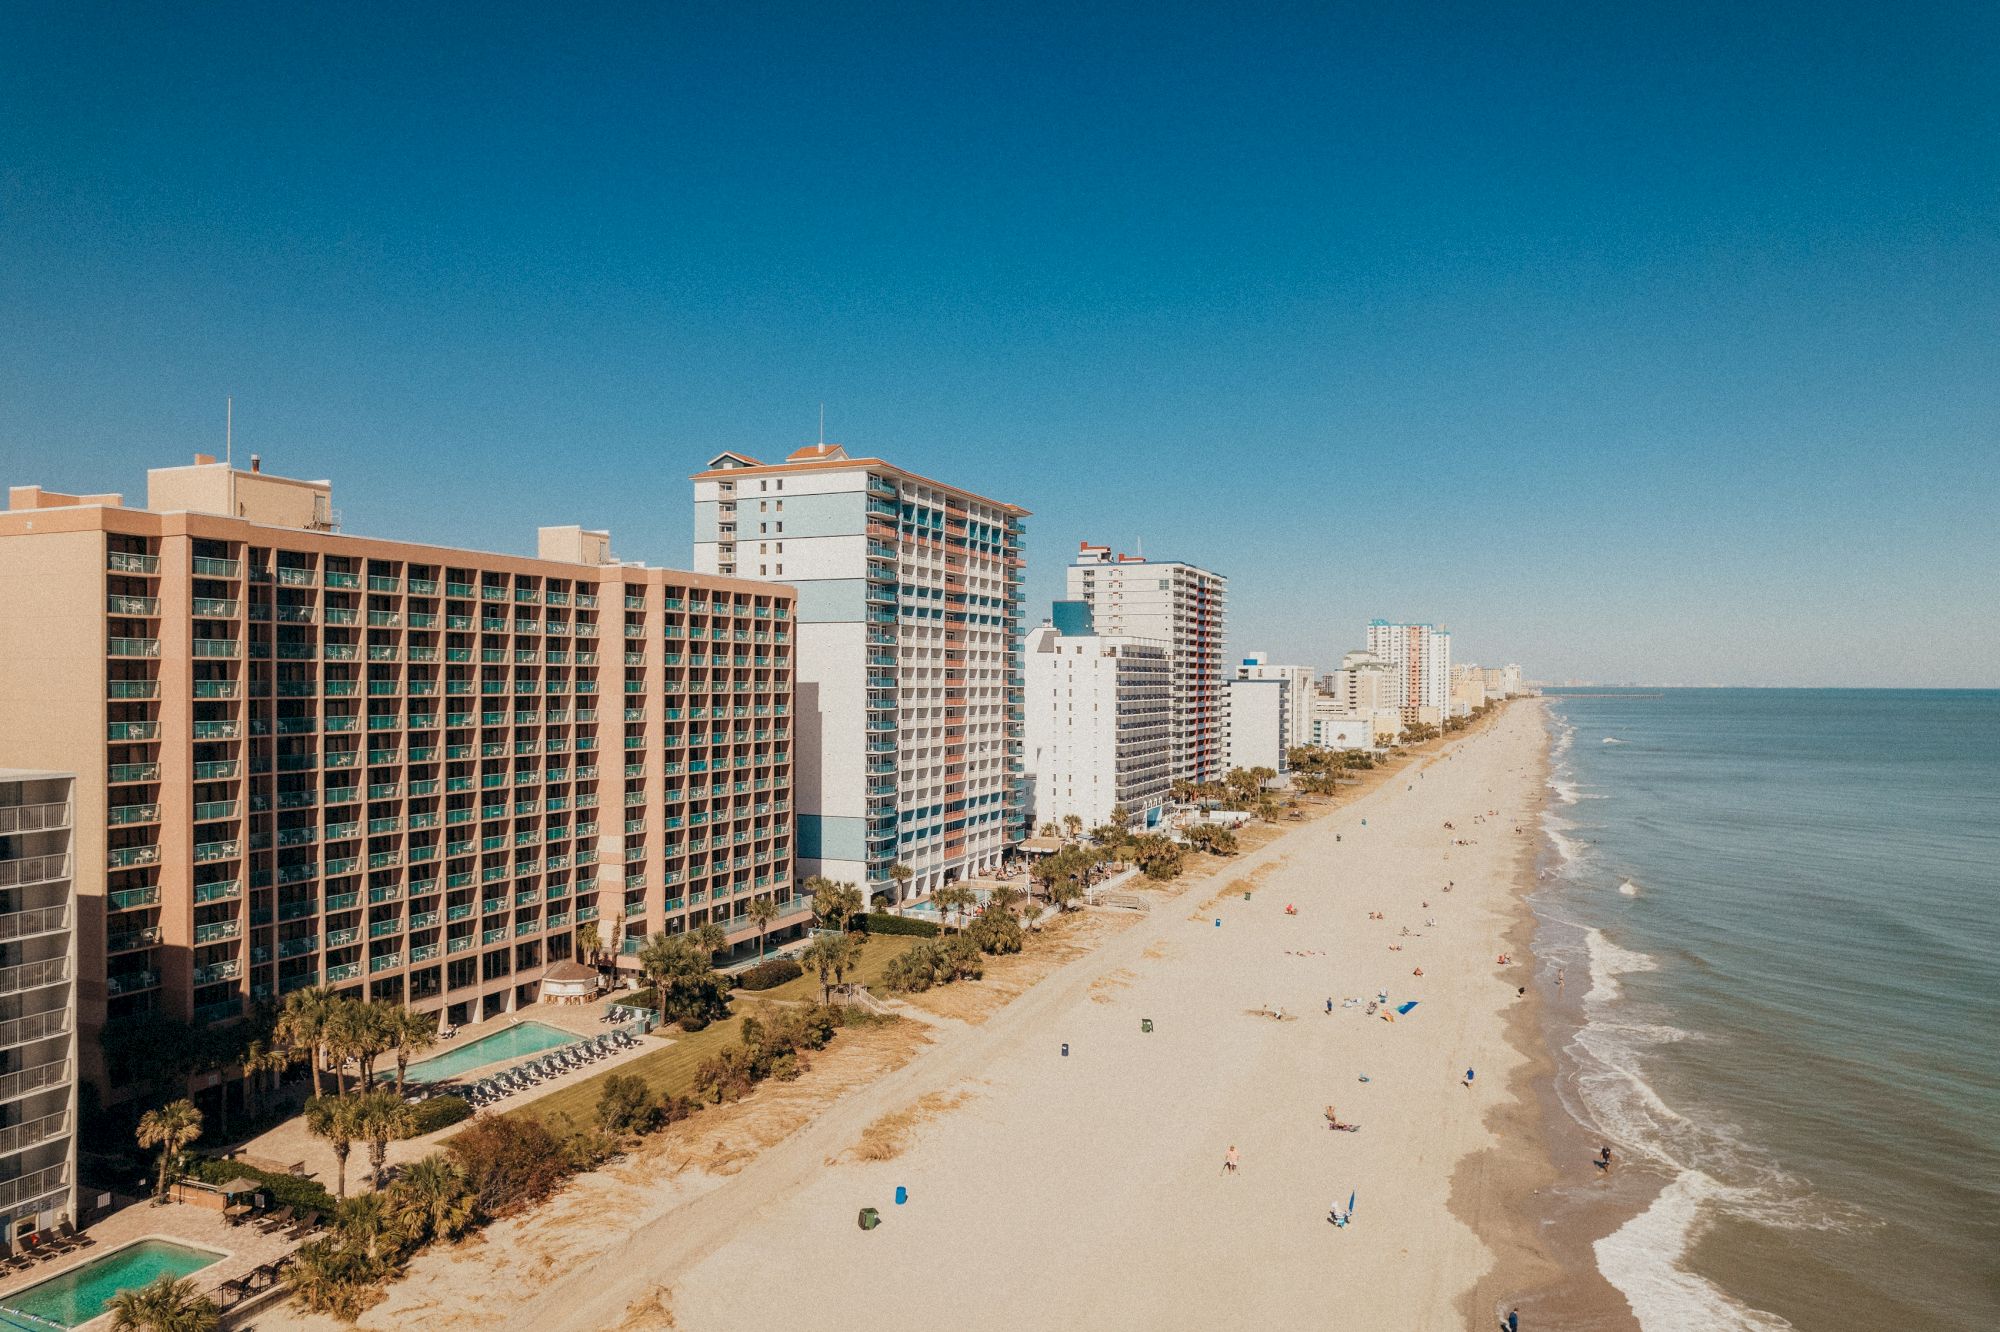 A coastline with tall buildings lining a sandy beach, with a calm ocean and clear blue sky in the background.